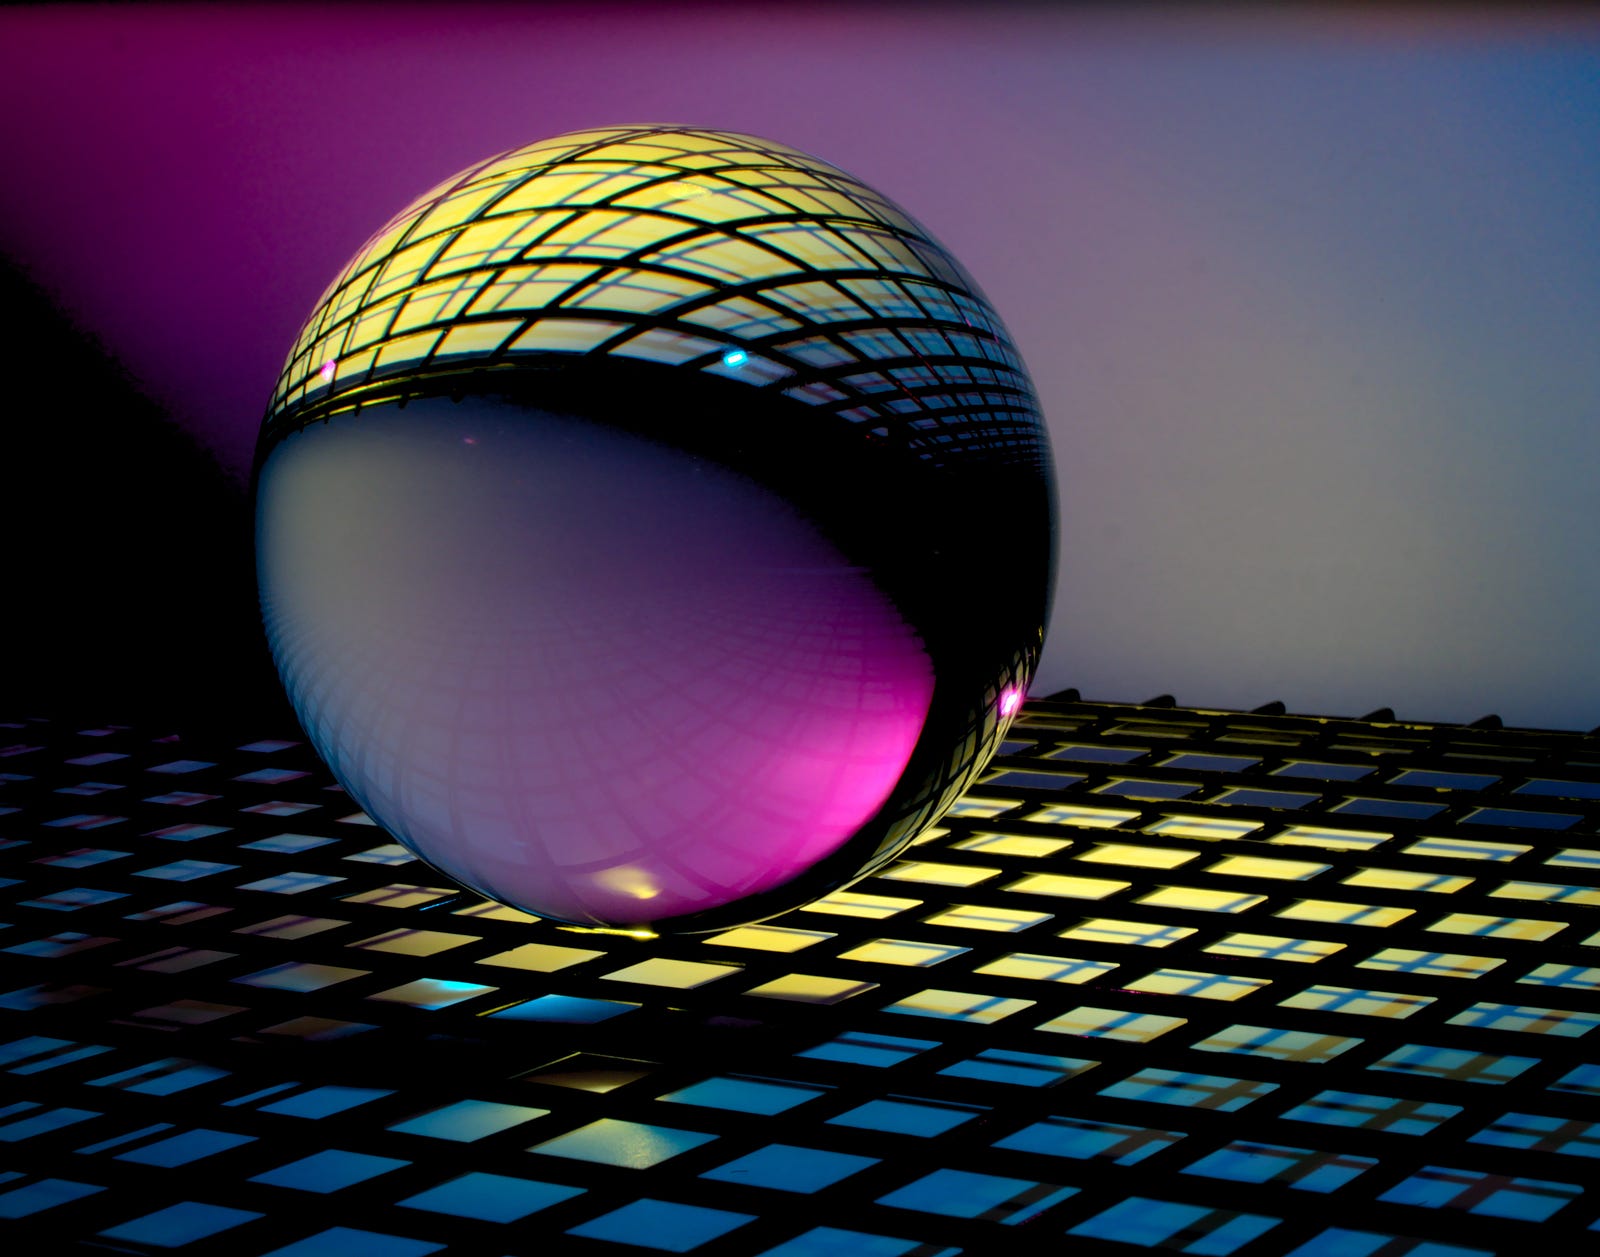 Sphere over a grid